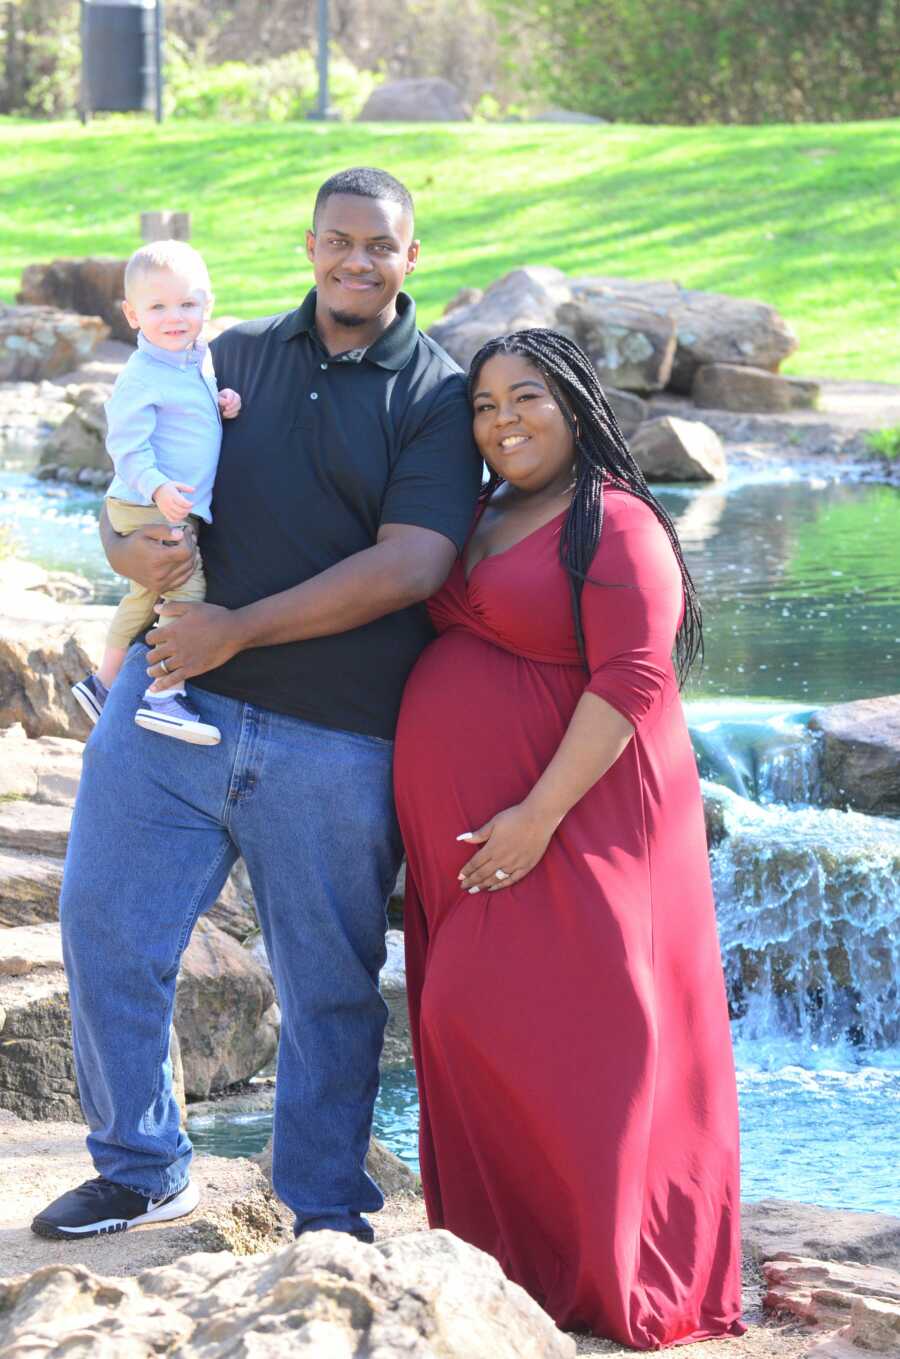 Dad and son pose with mom for maternity photoshoot.